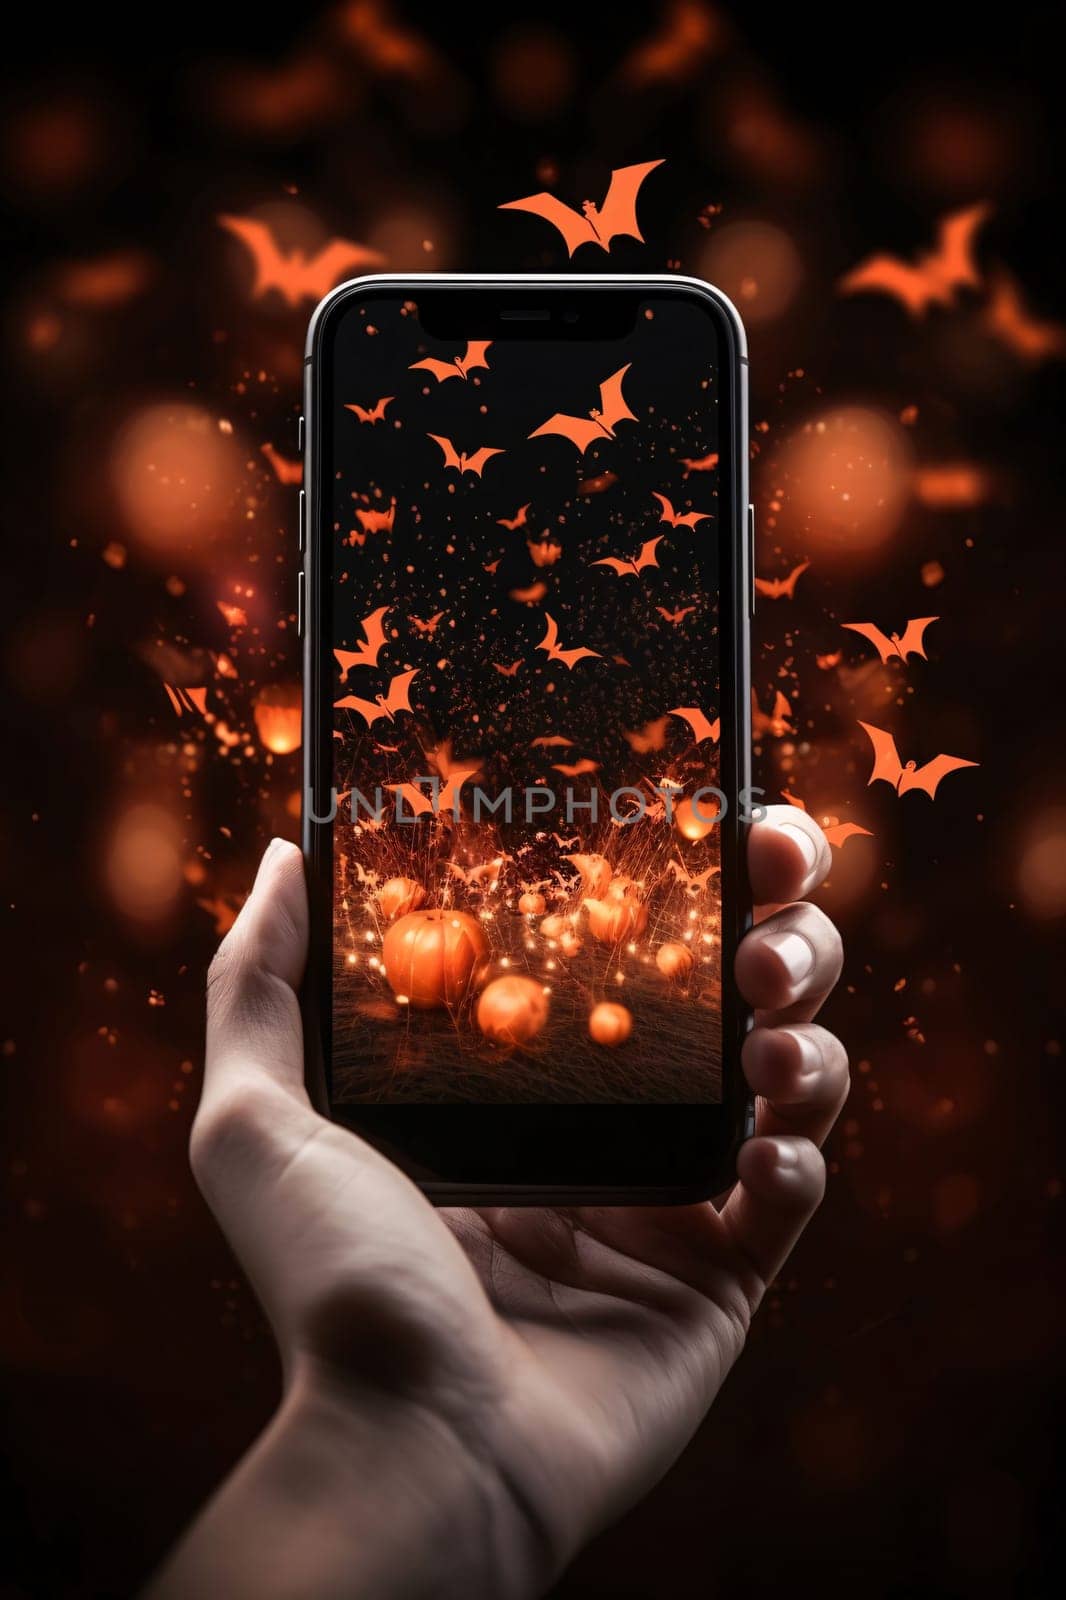 Smartphone screen: Halloween concept with hand holding smart phone with flying bats and pumpkins